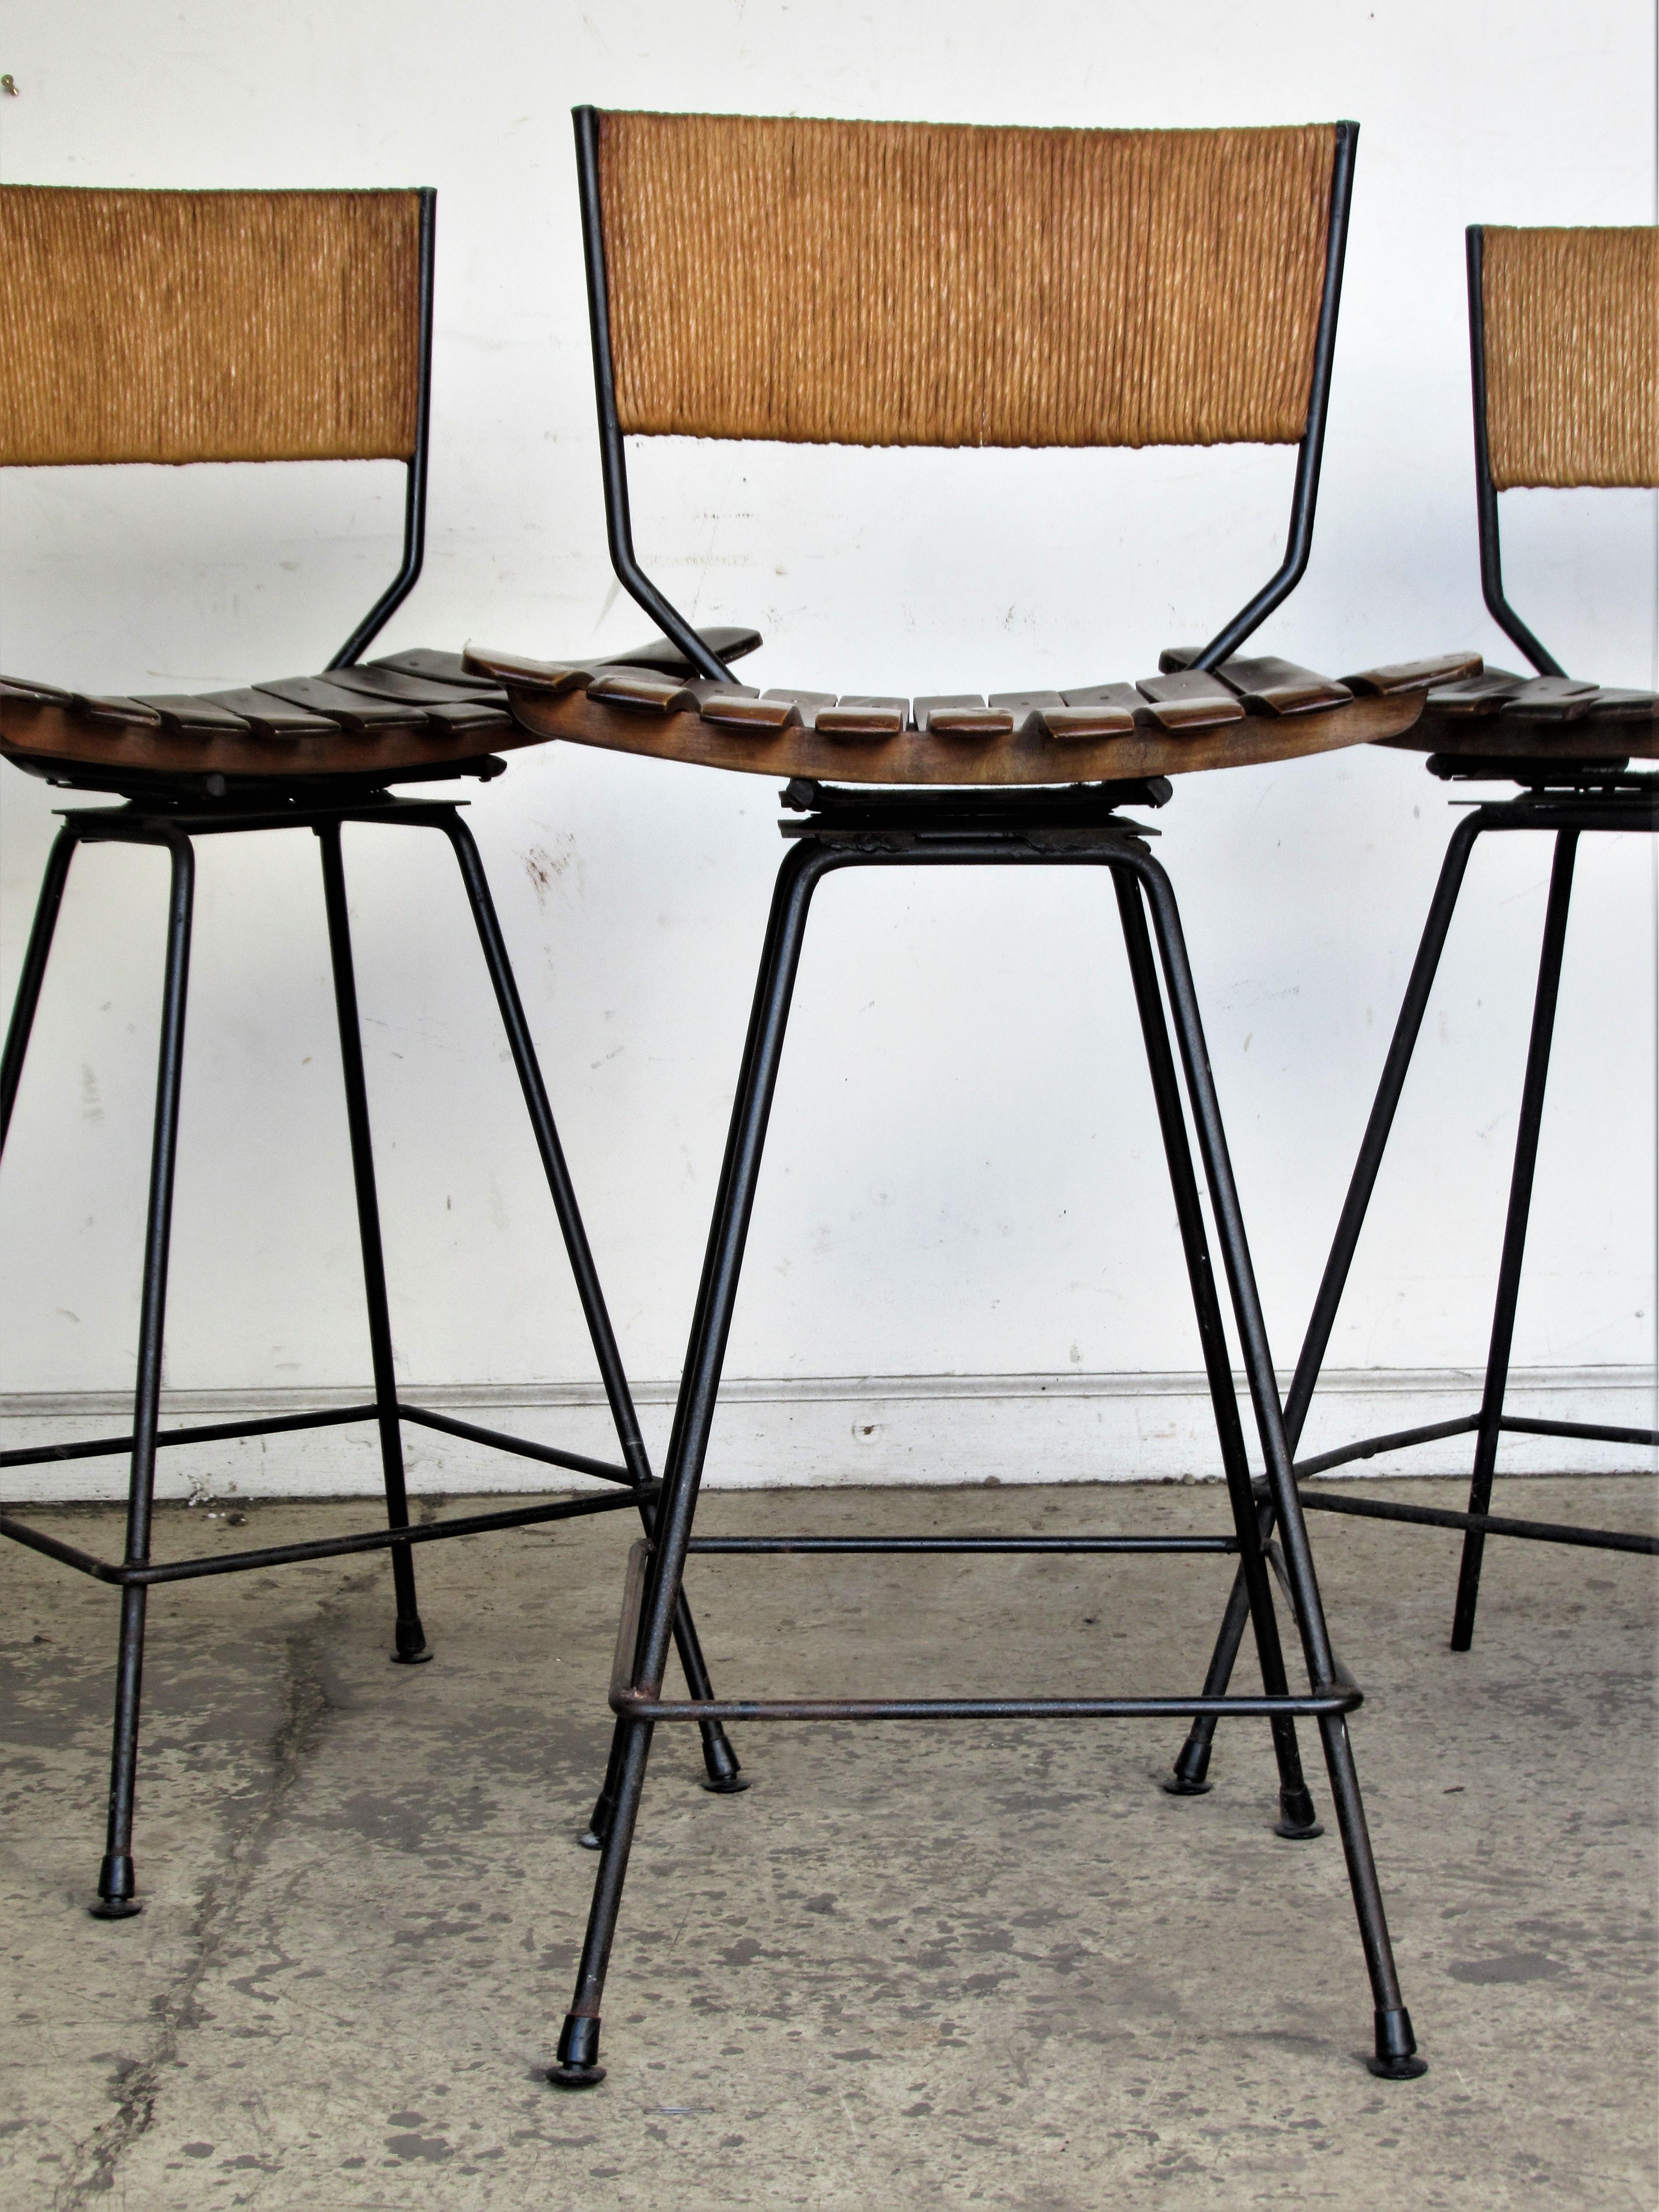 Set of three matching mid-20th century modern swivel seat stools with black iron frames, woven rush backs and contoured wood plank seats in great original vintage condition by Arthur Umanoff for Raymor, circa 1960. Look at all pictures and read